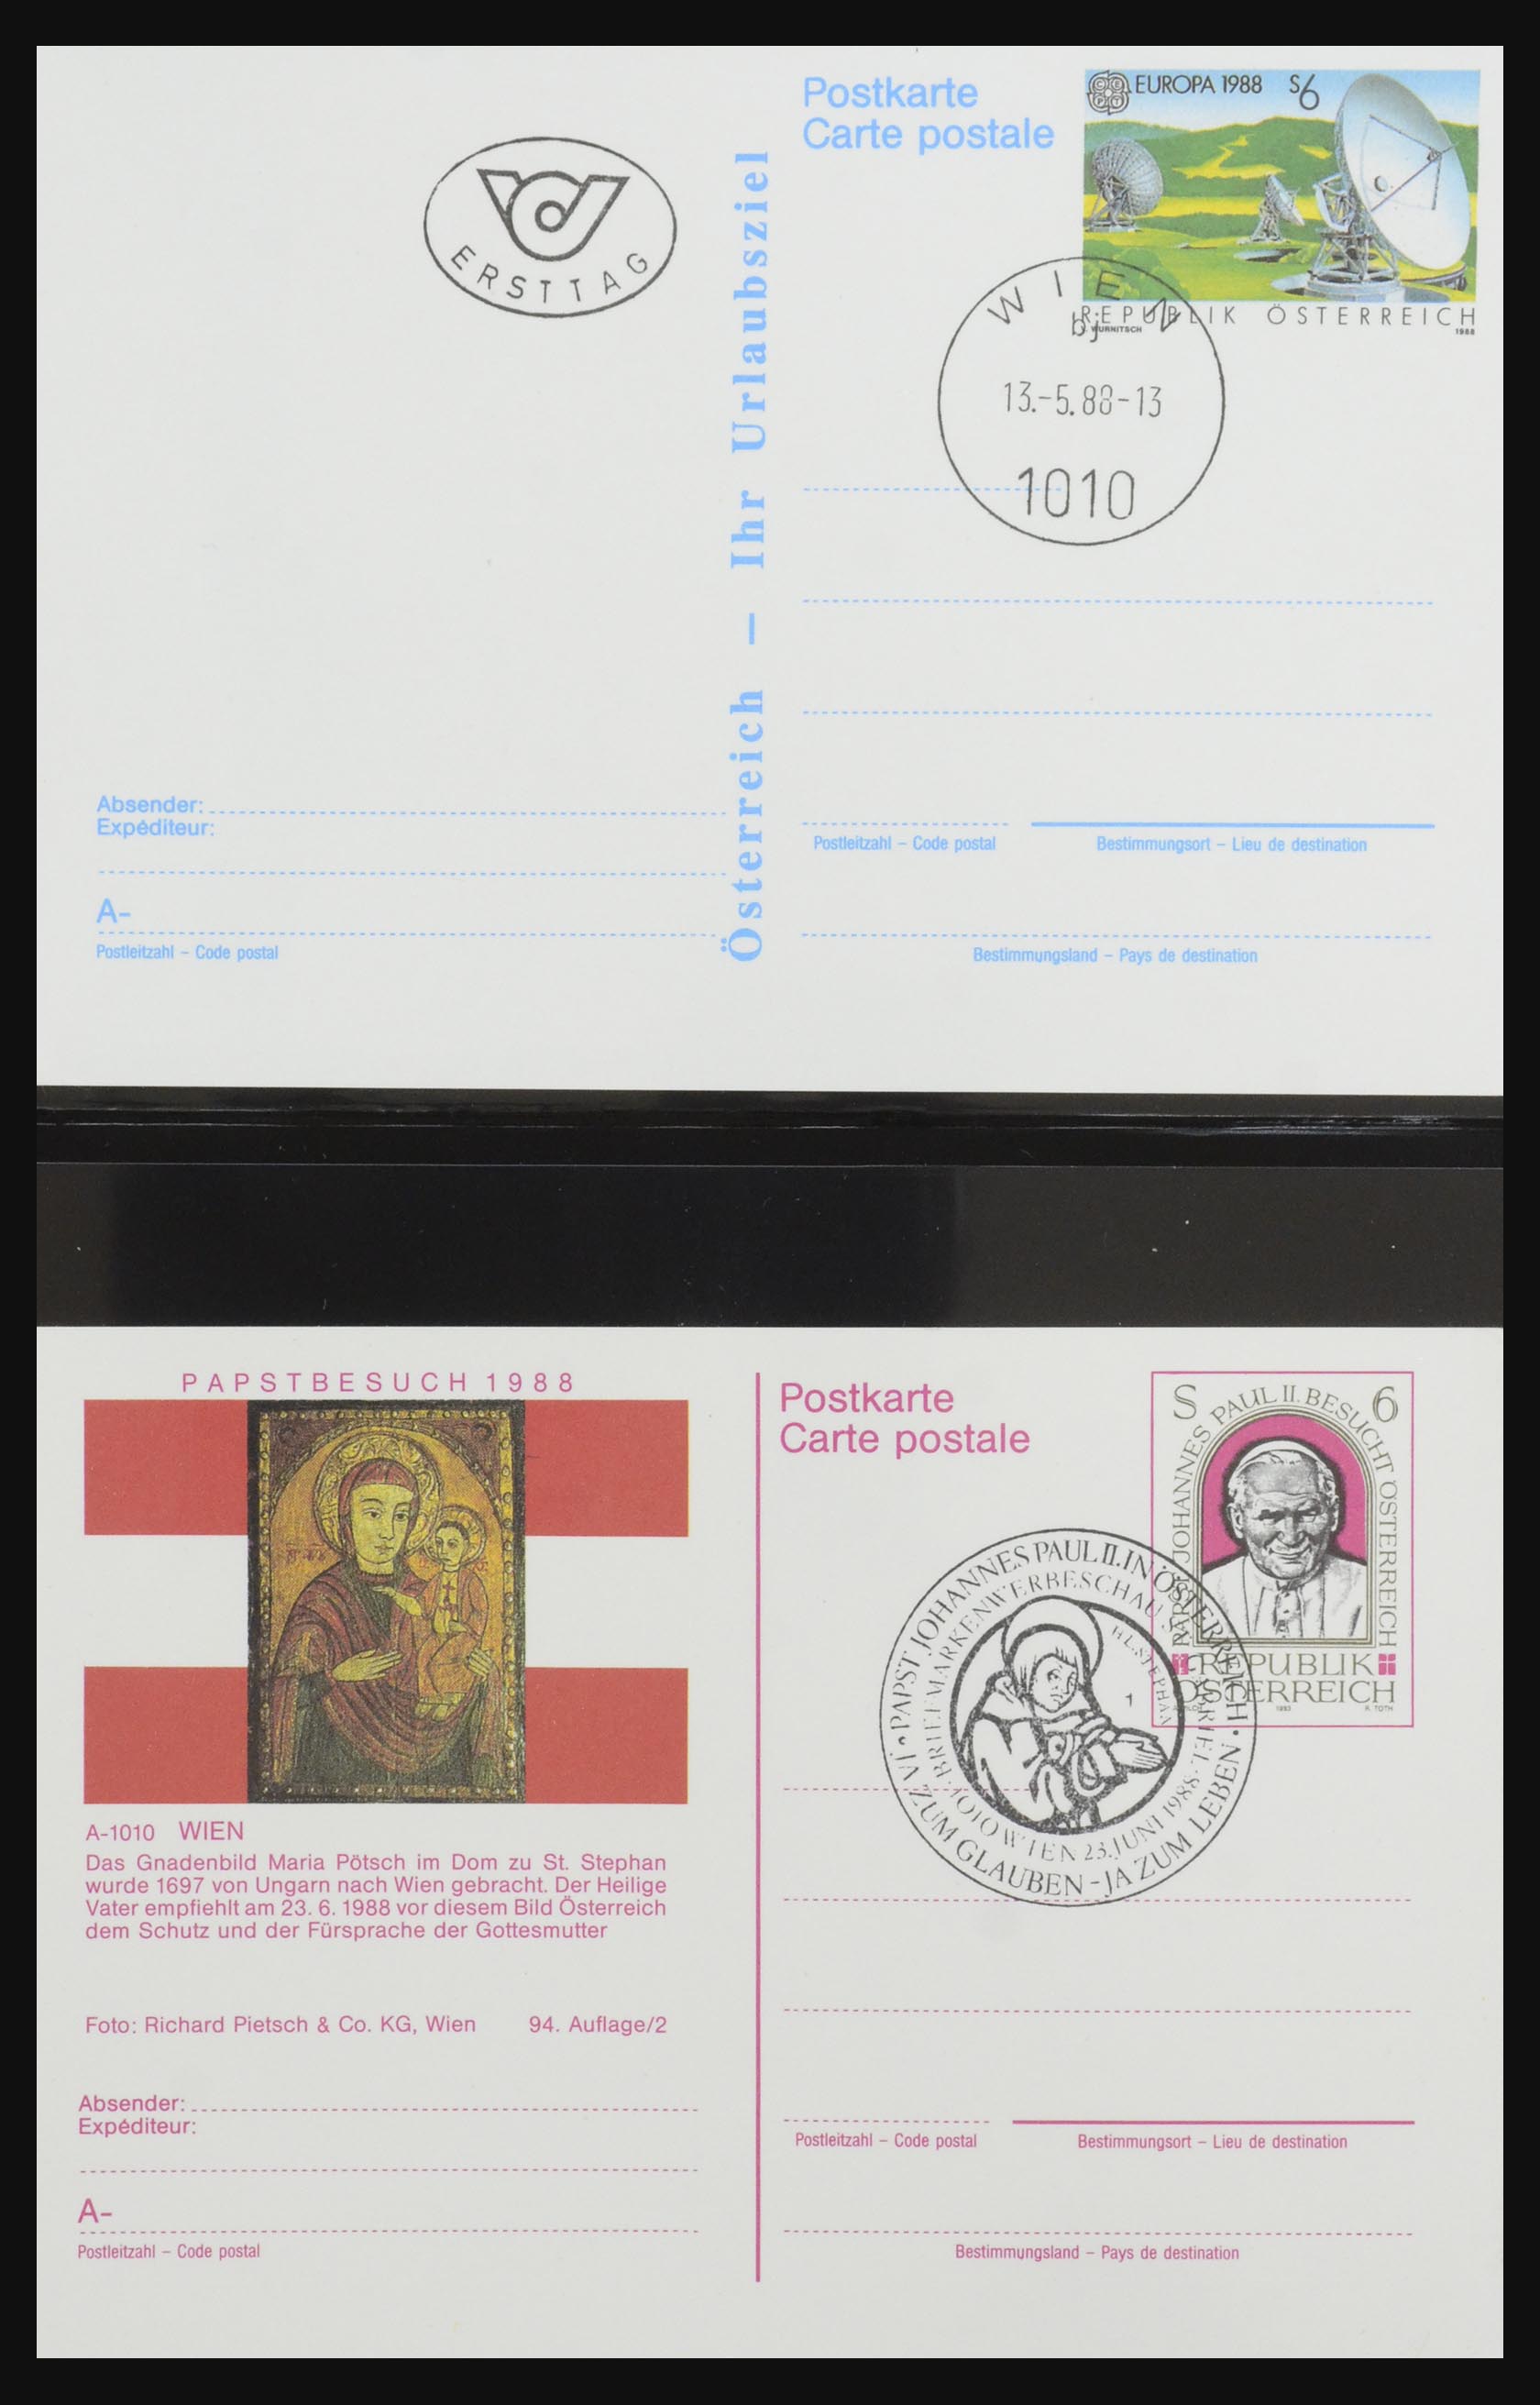 32254 1721 - 32254 Austria covers from 1800.